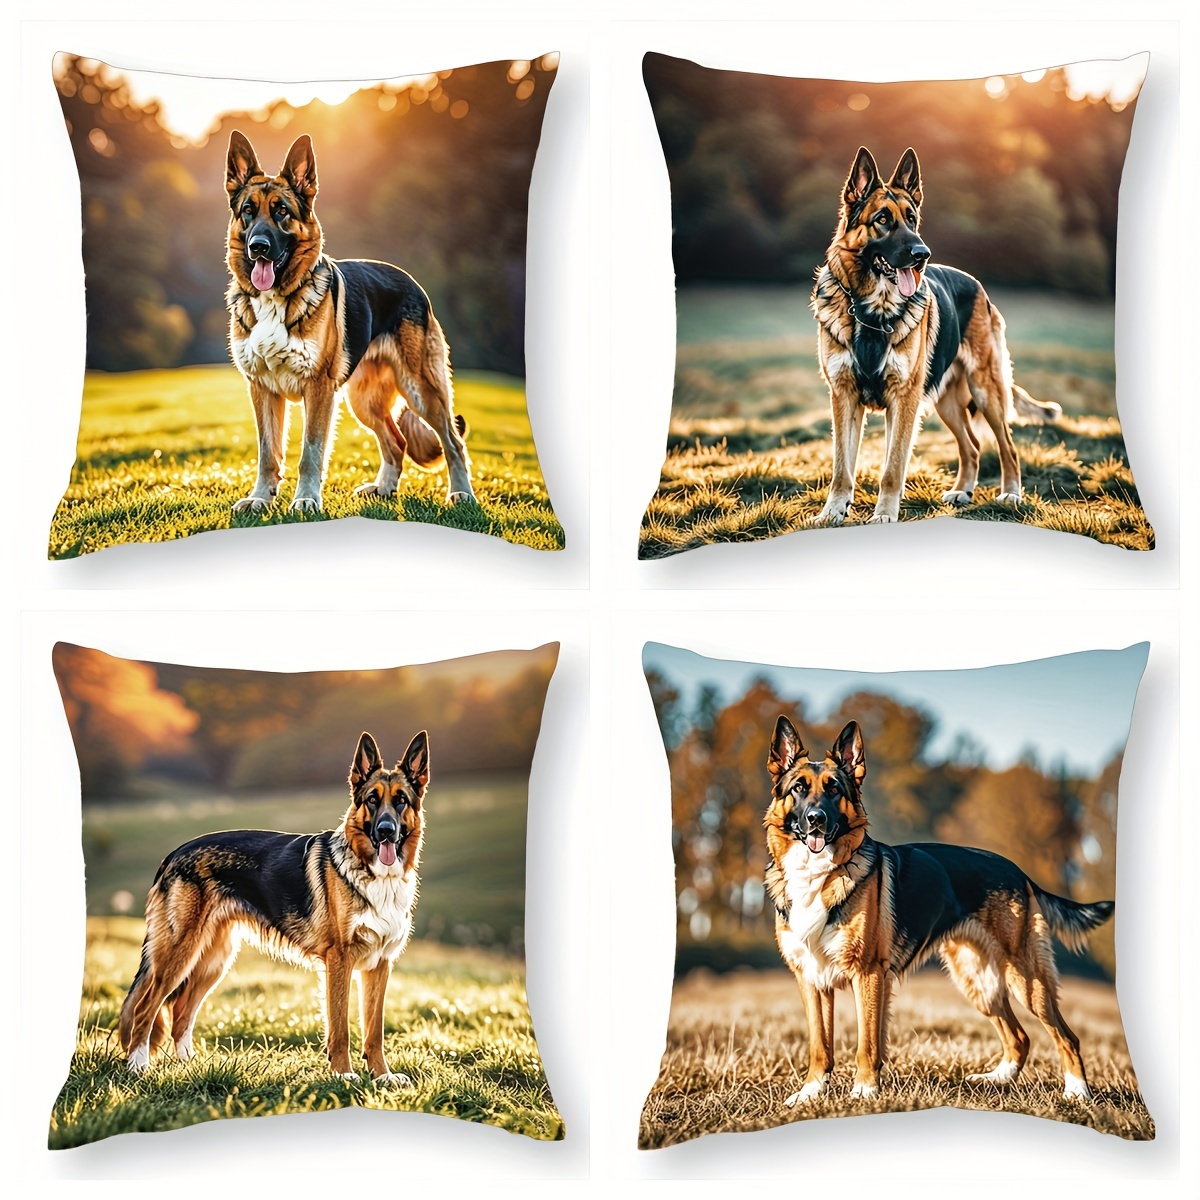 

4-piece Set Soft Plush Pillowcases With German Shepherd Design - Single-sided Print, Perfect For Sofa & Home Decor, Machine Washable, Zip Closure, 17.7x17.7 Inches (no Insert)